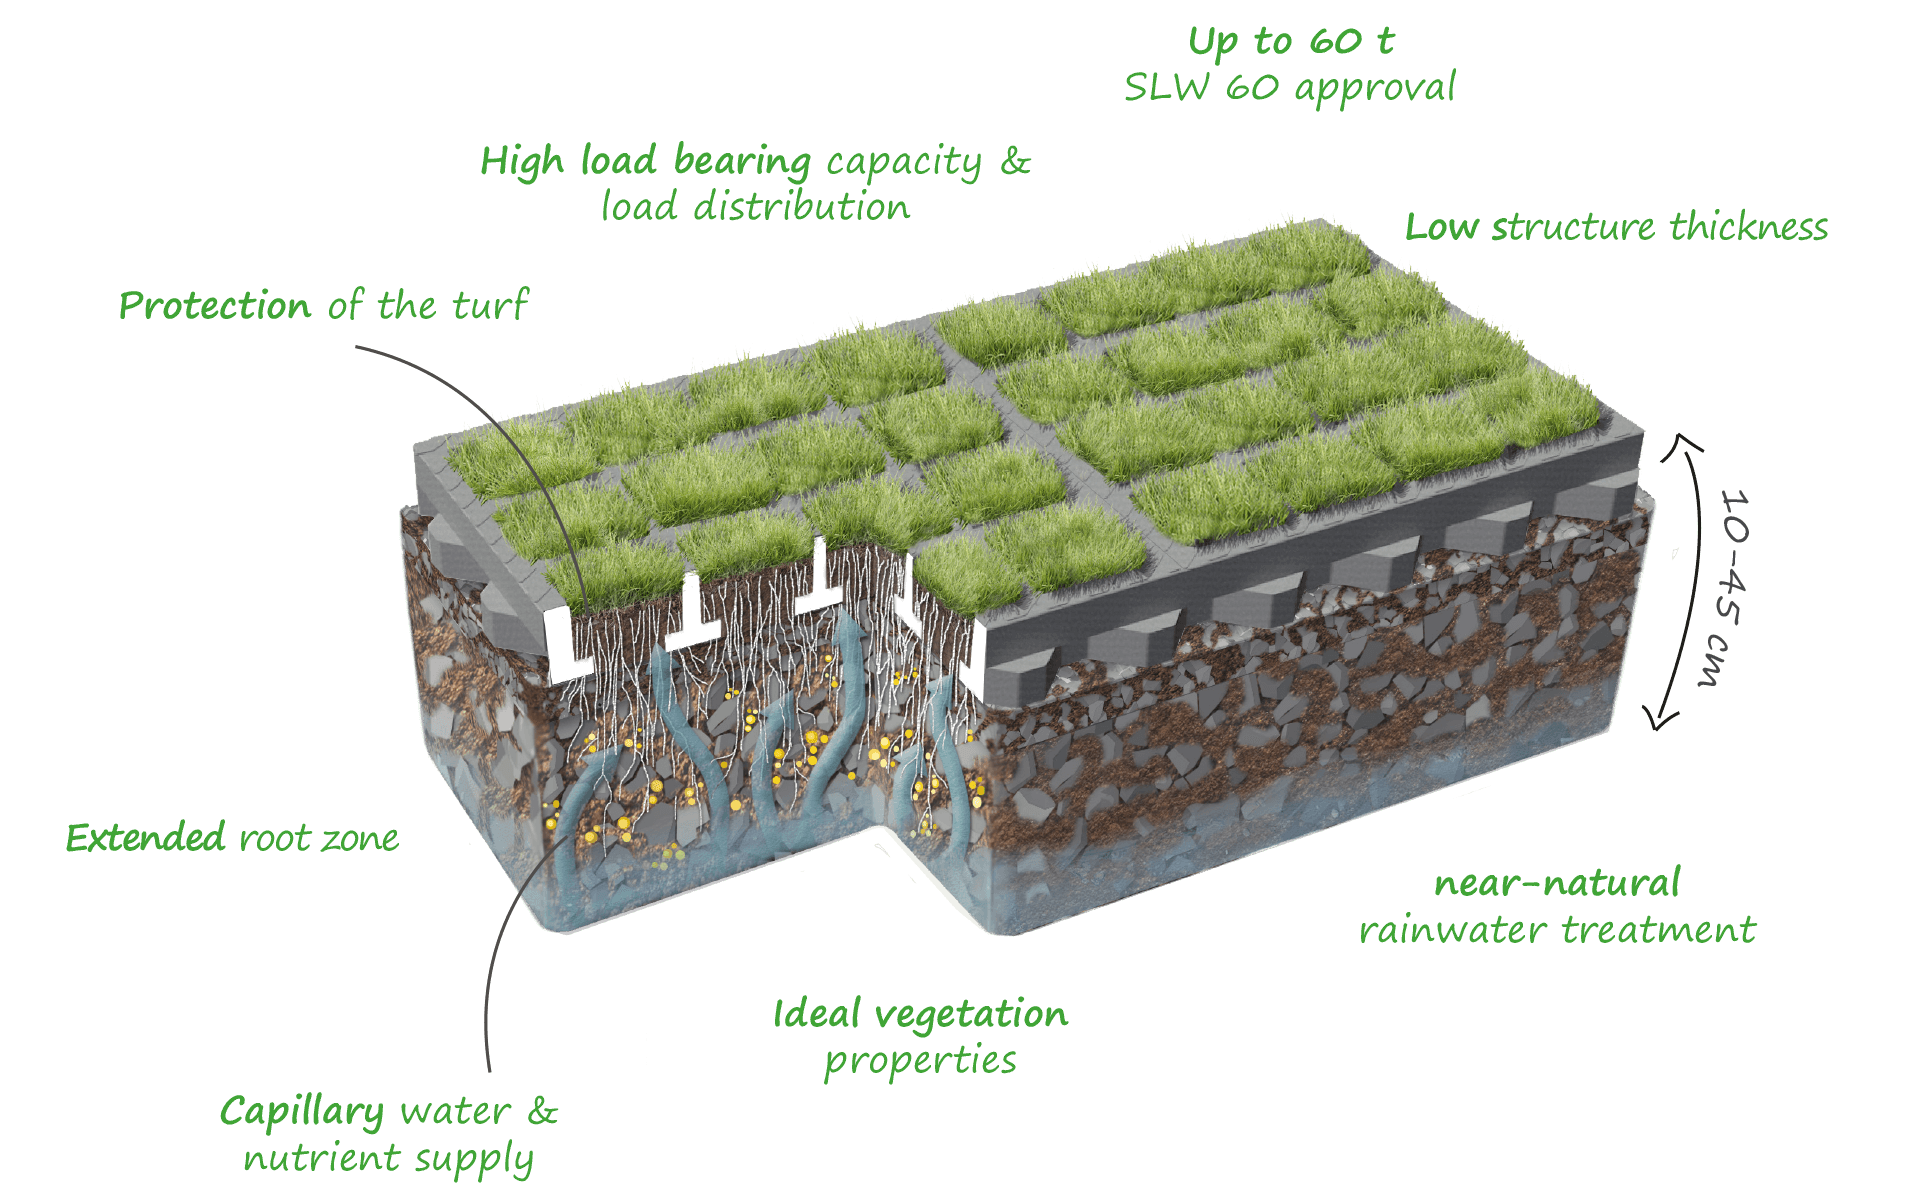 Many+advantages+of+TTE%C2%AE+GREEN+-+low+build-up+strength%2C+near-natural+rainwater+treatment%2C+substrate+structure+suitable+for+vegetation%2C+capillary+water+and+nutrient+supply%2C+deep+growth+of+the+roots%2C+protection+of+the+sward%2C+highly+load-bearing+and+load-distributing+elements%2C+usable+for+heavy-duty+traffic